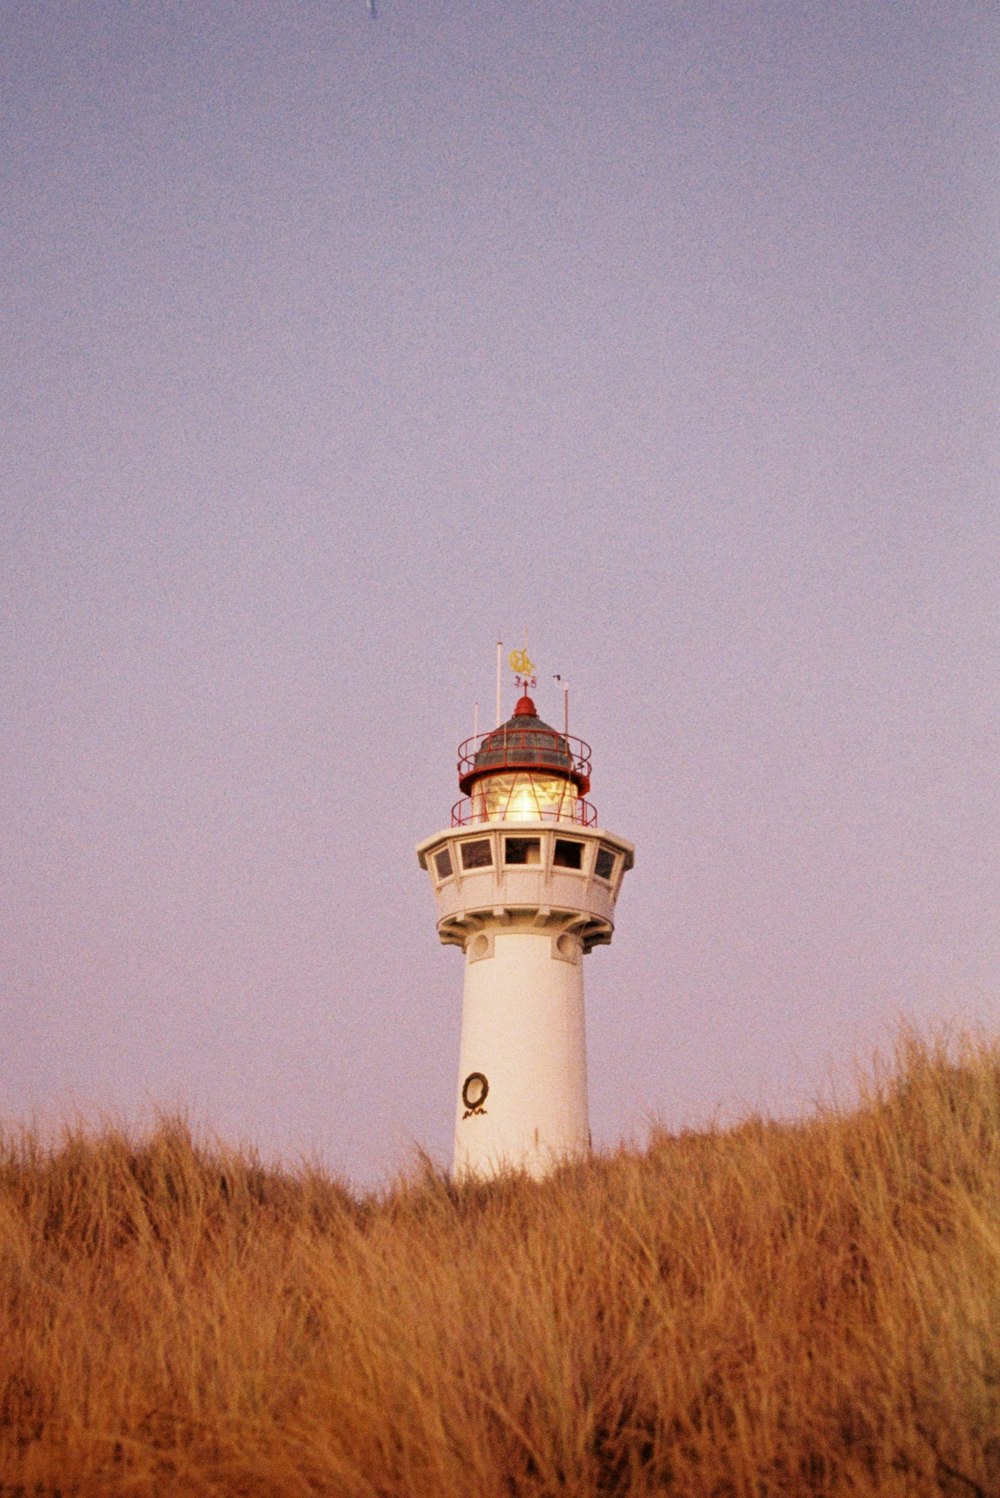 a white lighthouse on a hill with a blue sky in the background